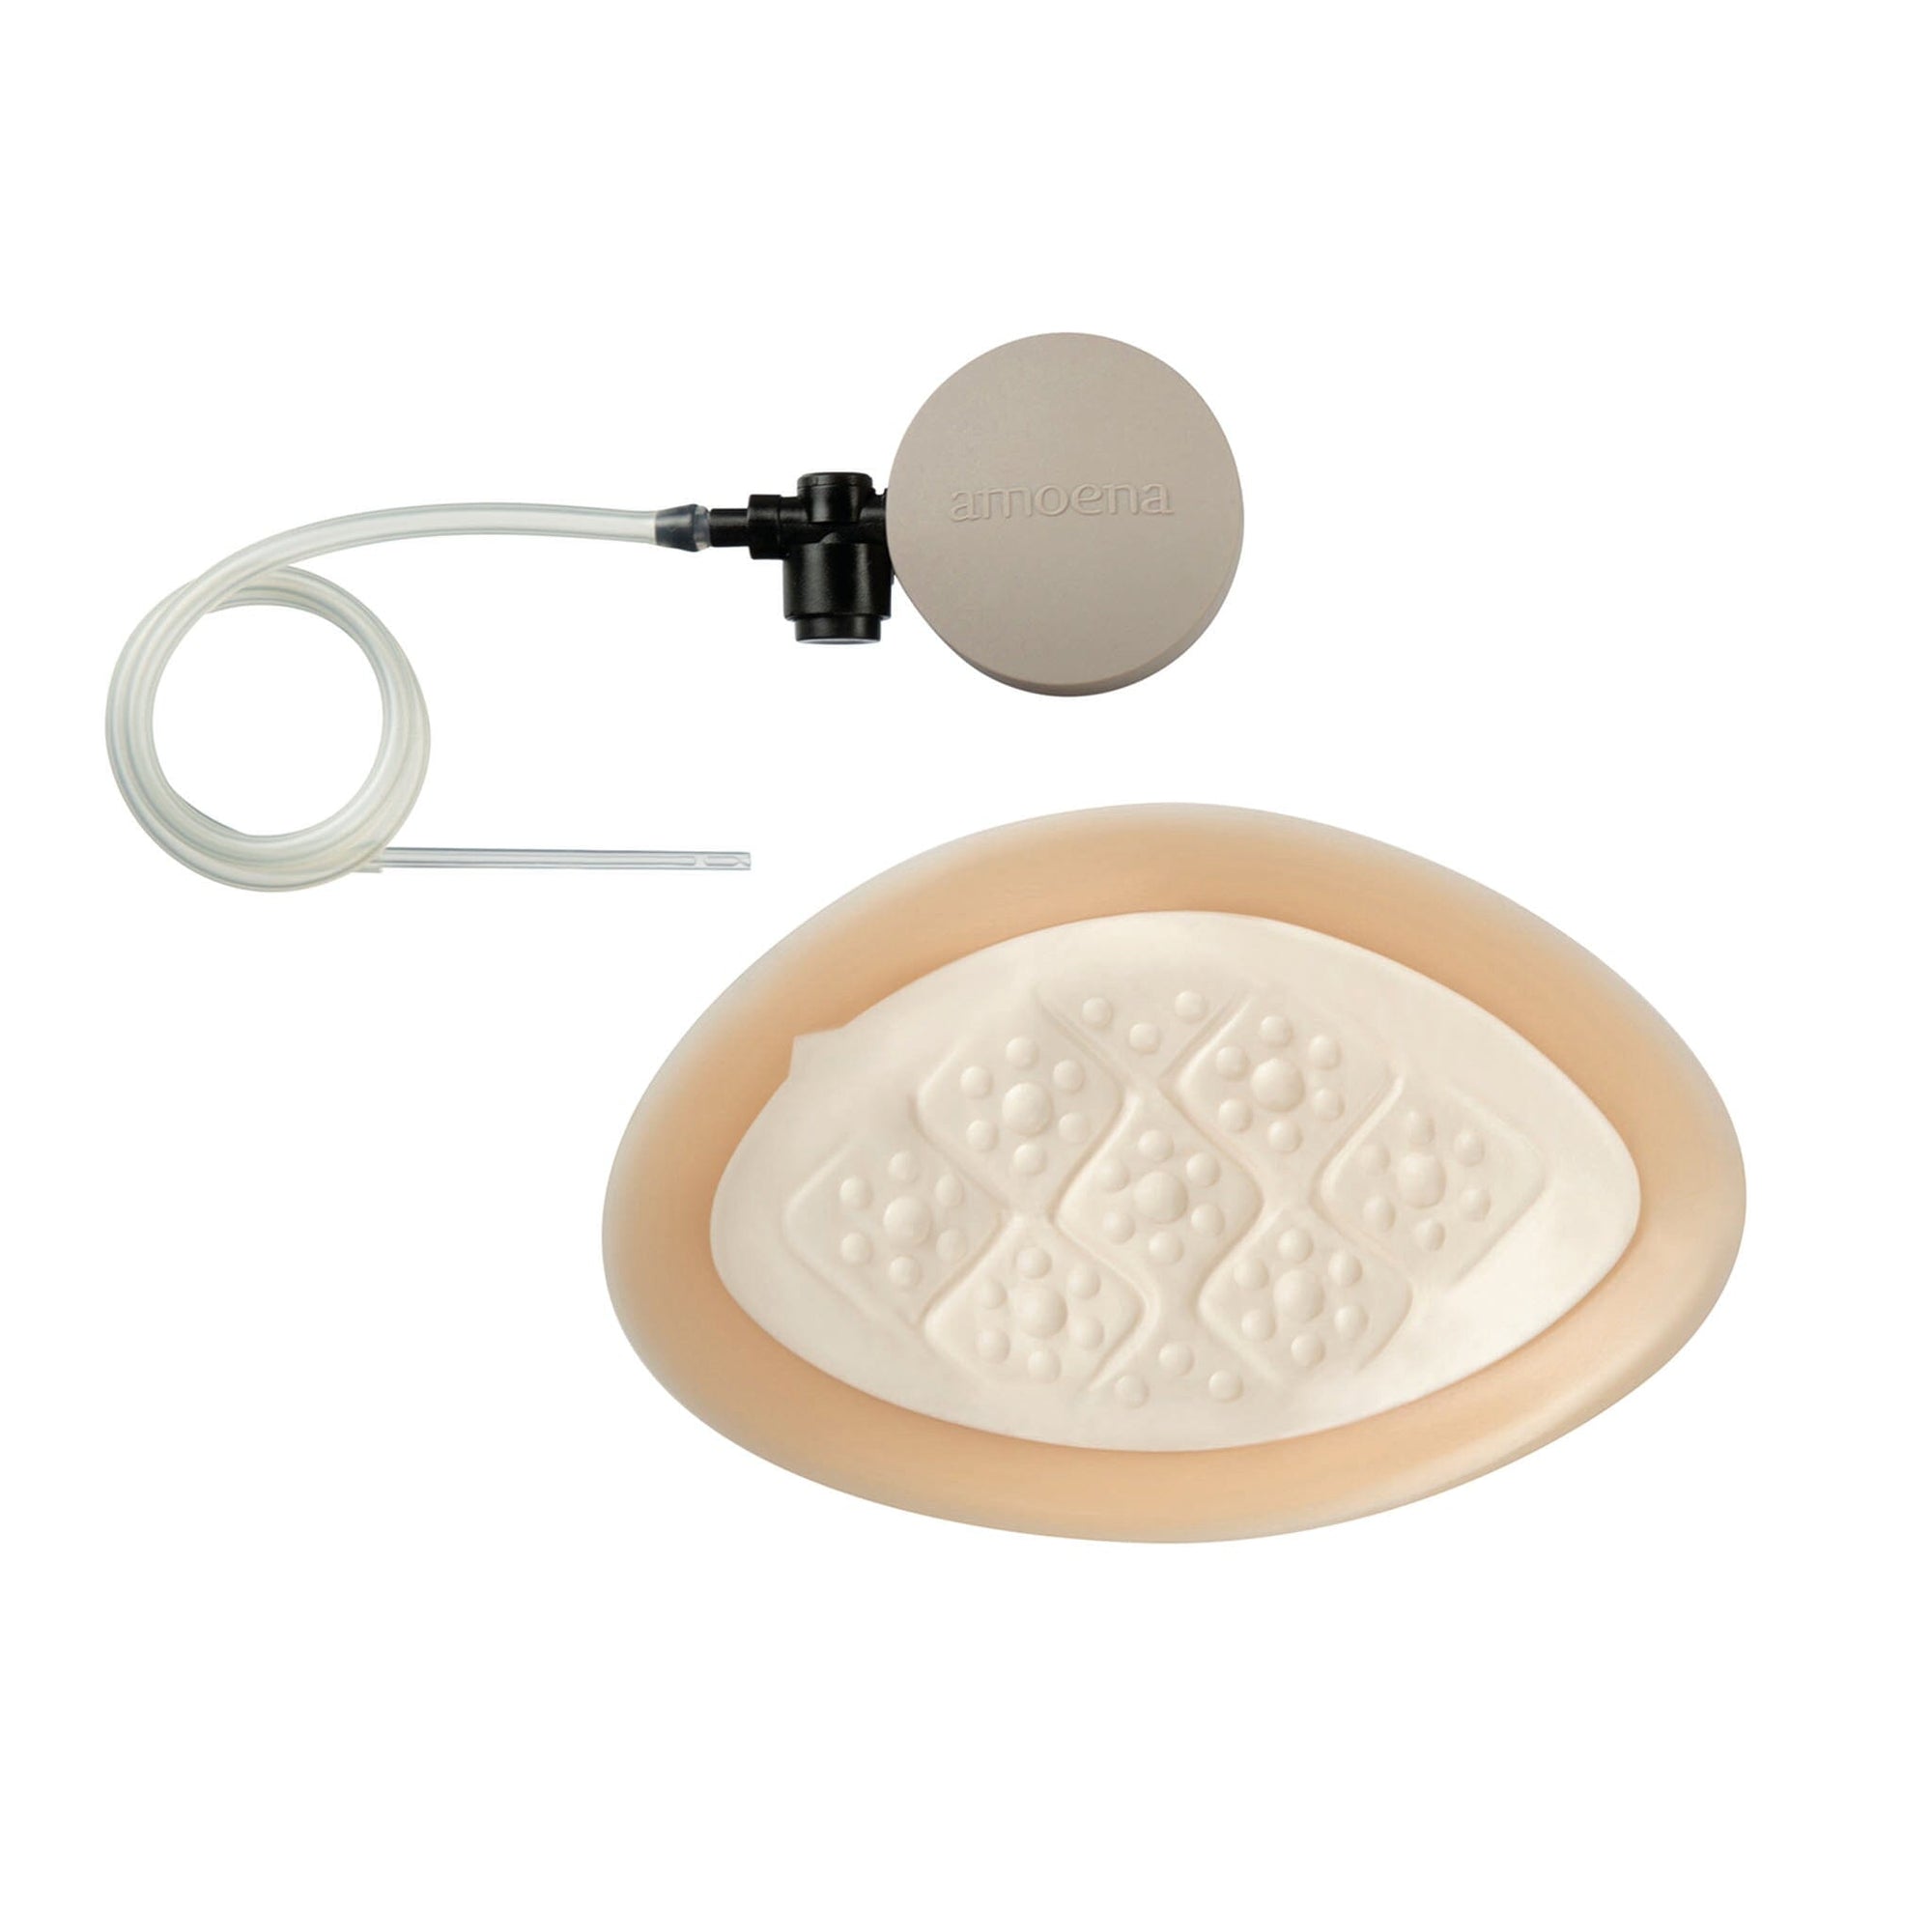 Balance Adapt Air Breast Shaper with Pump, shown in Ivory.